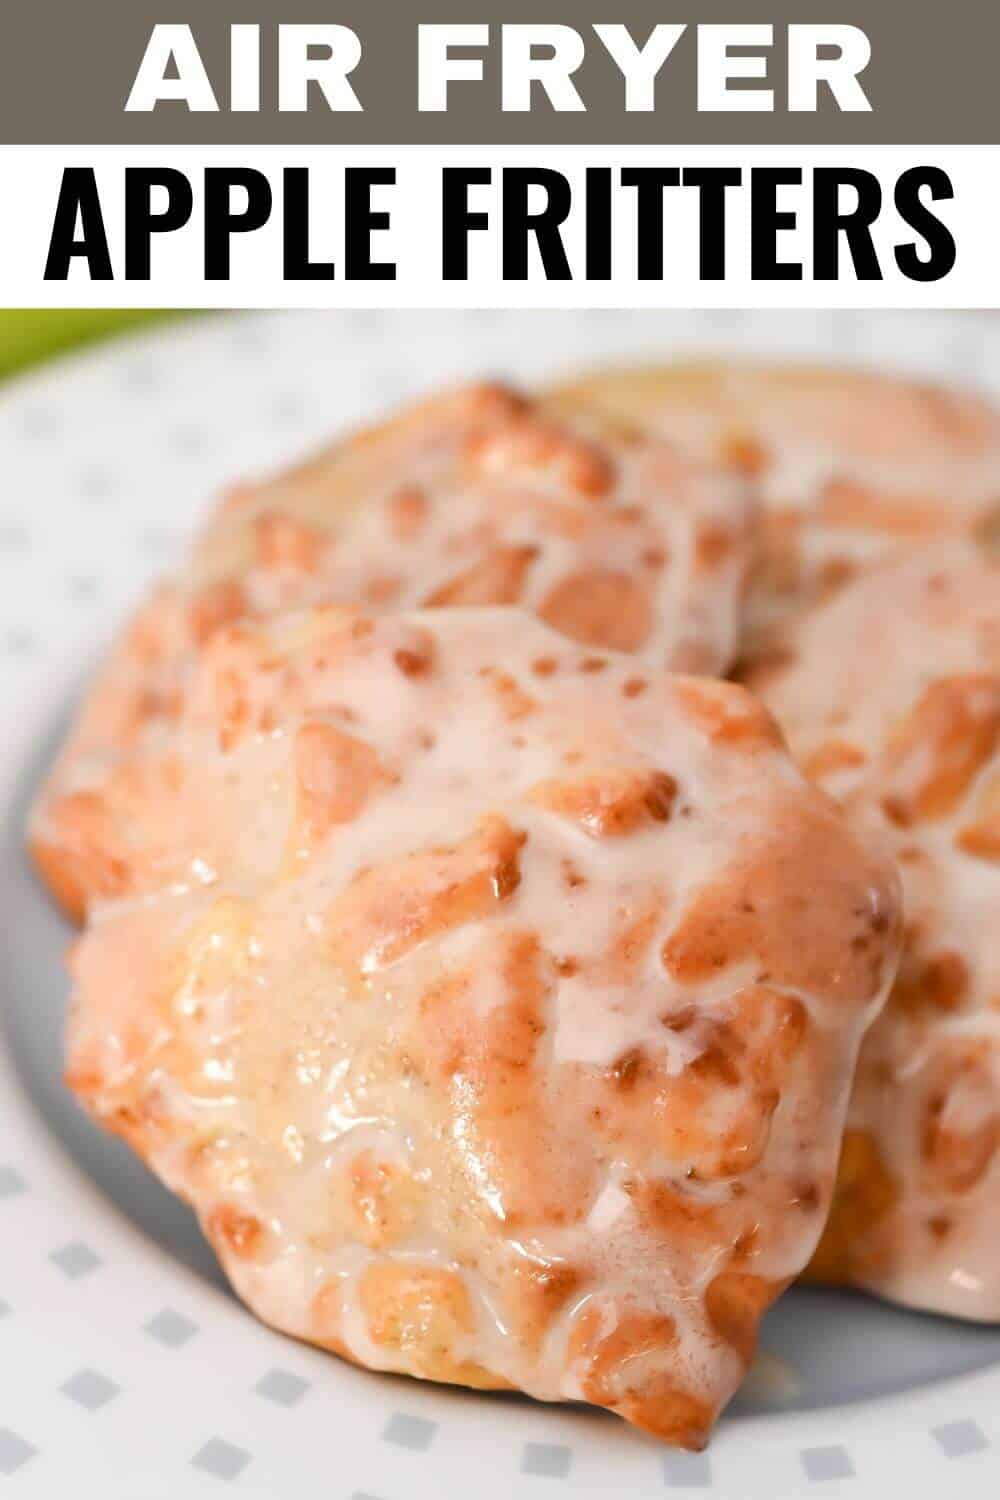 Air fryer apple fritters on a plate.